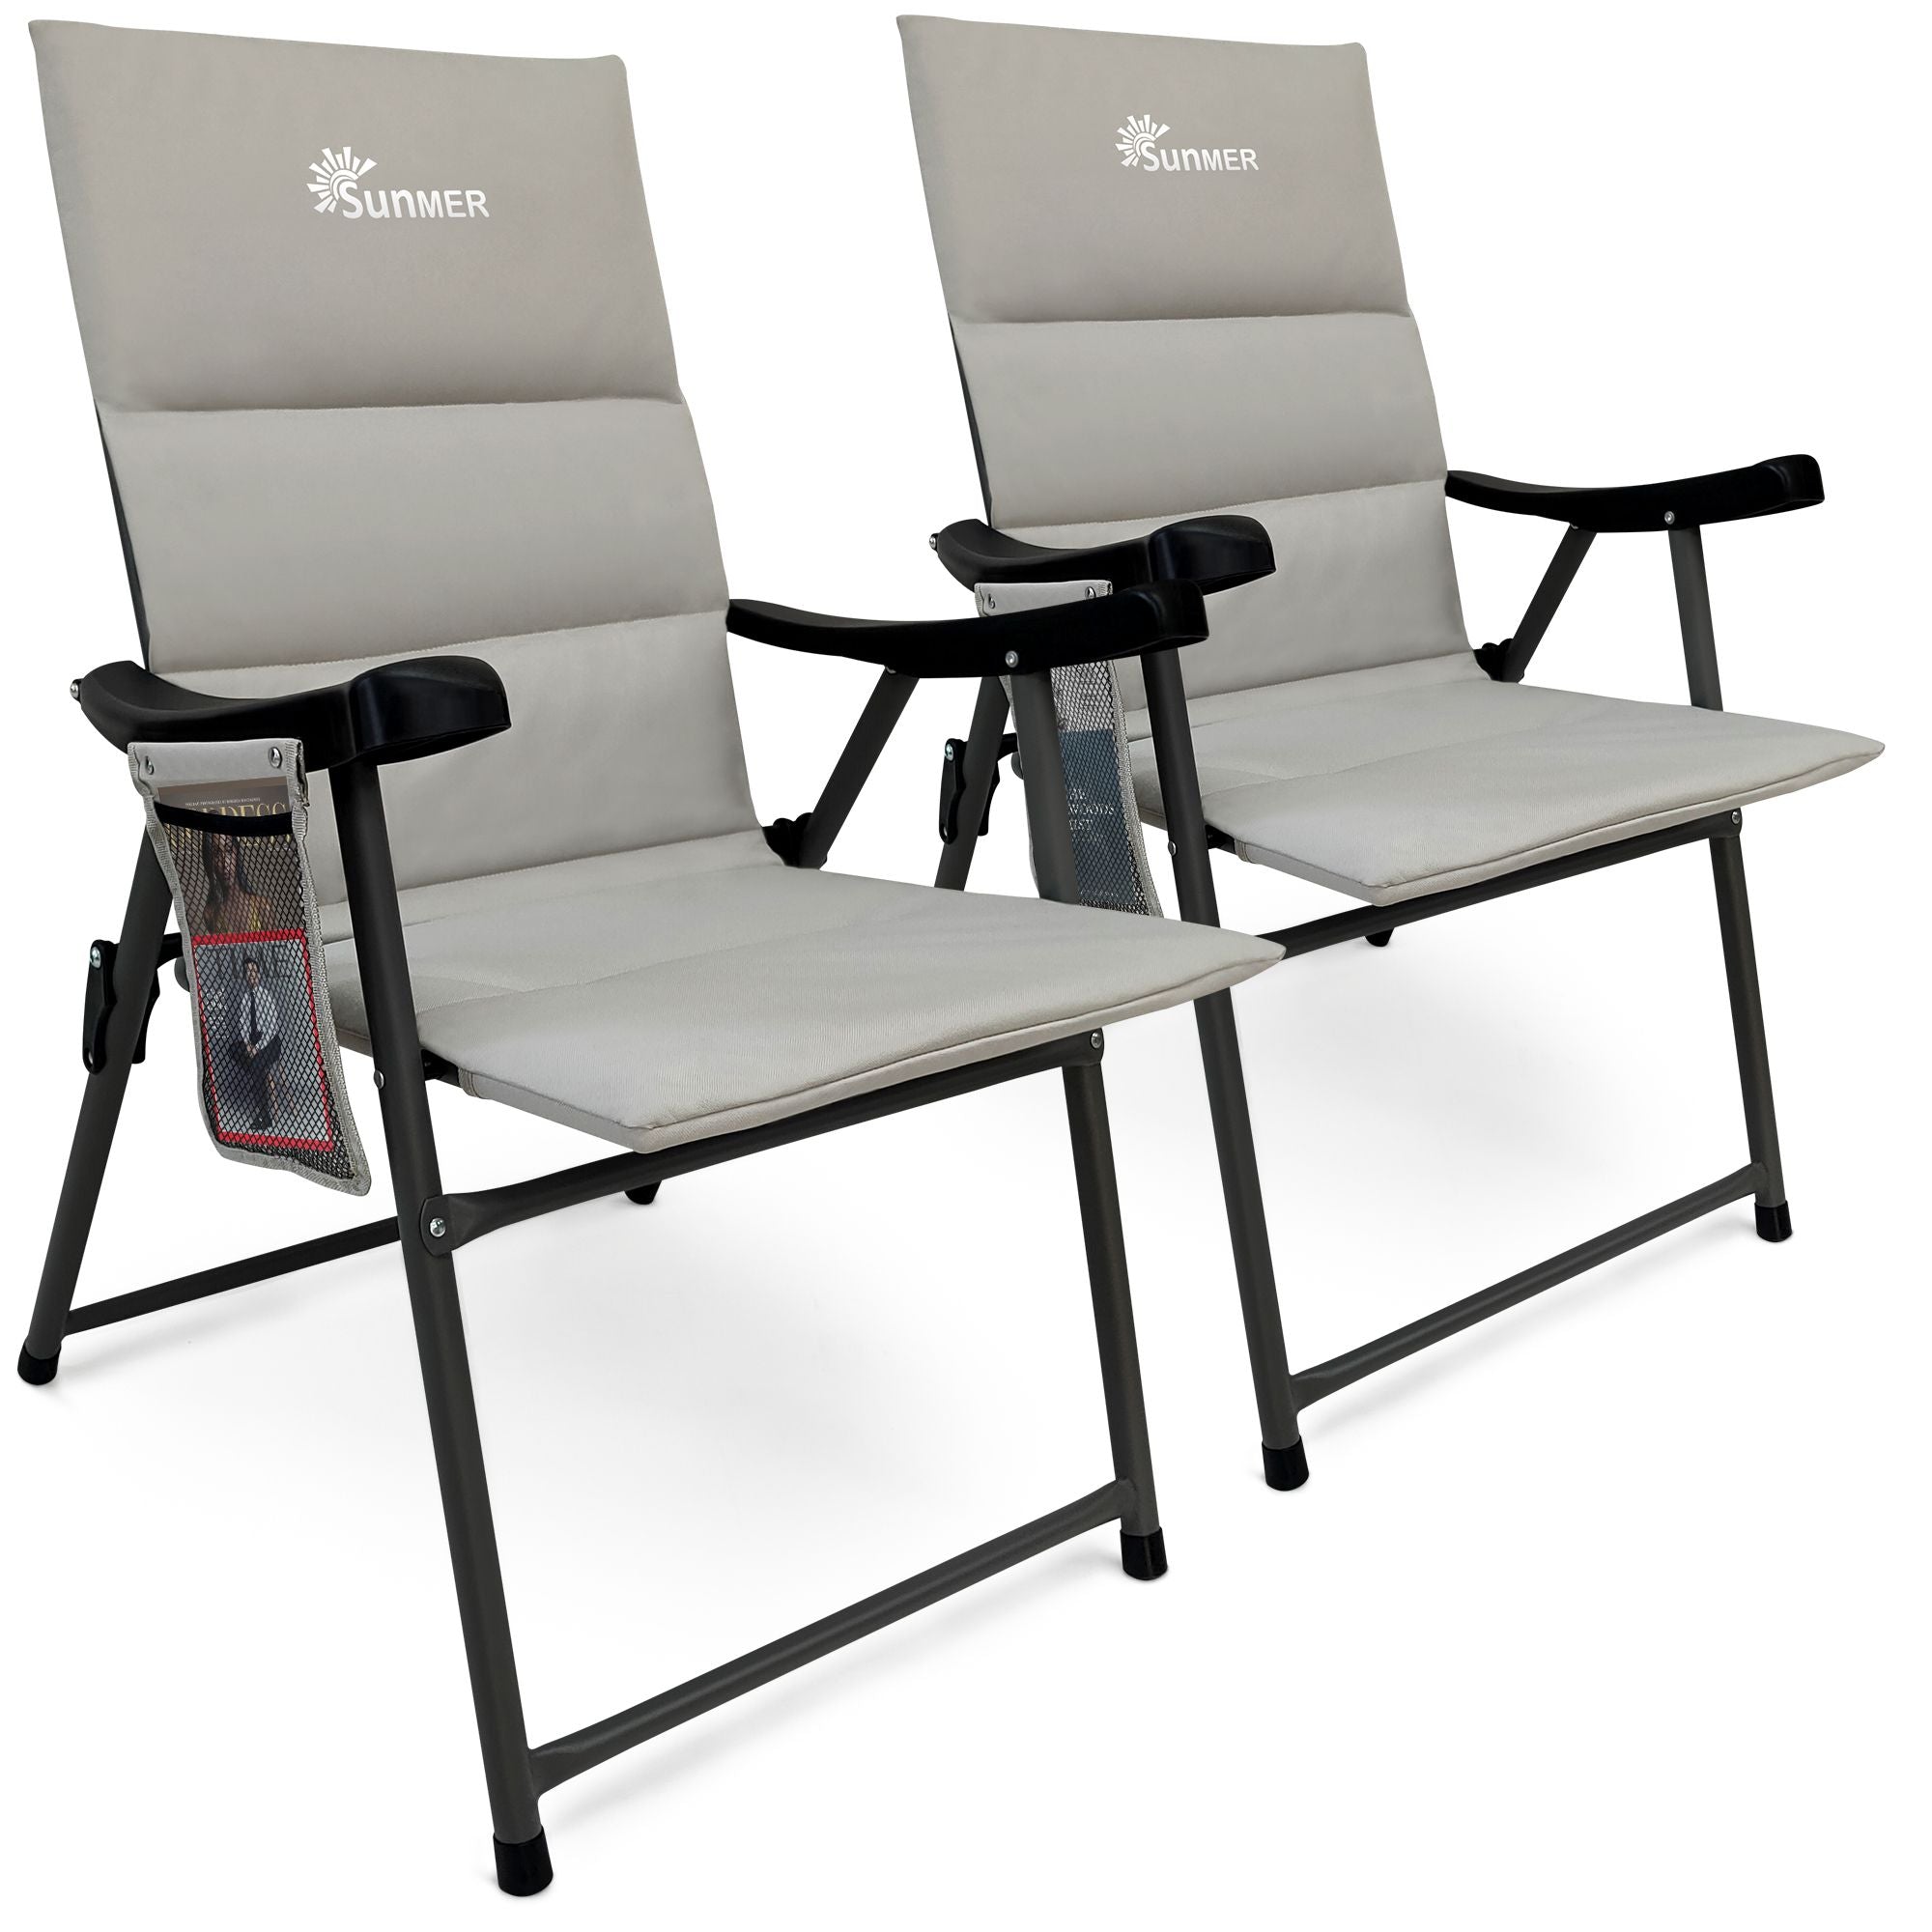 Set of 2 Padded Folding Garden Chairs with Side pocket - Grey